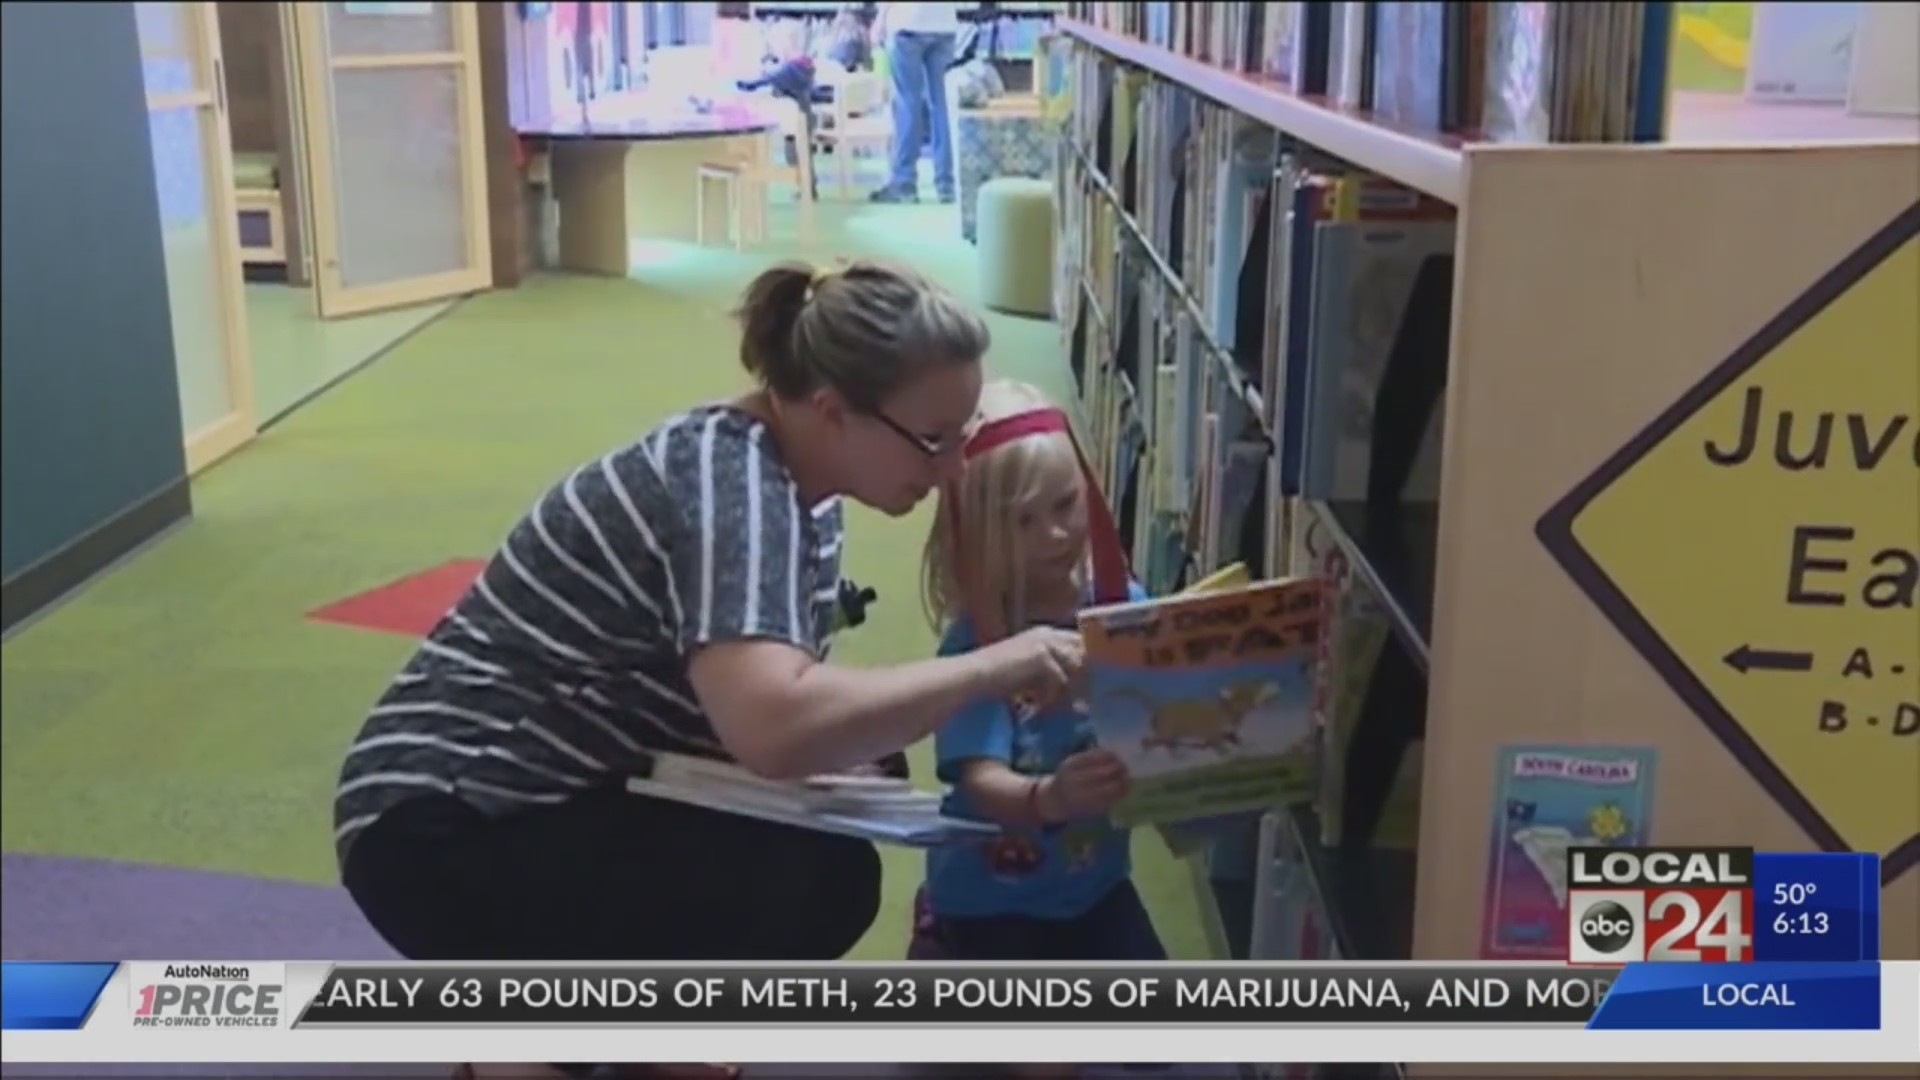 Memphis Public Libraries to eliminate fines for overdue materials